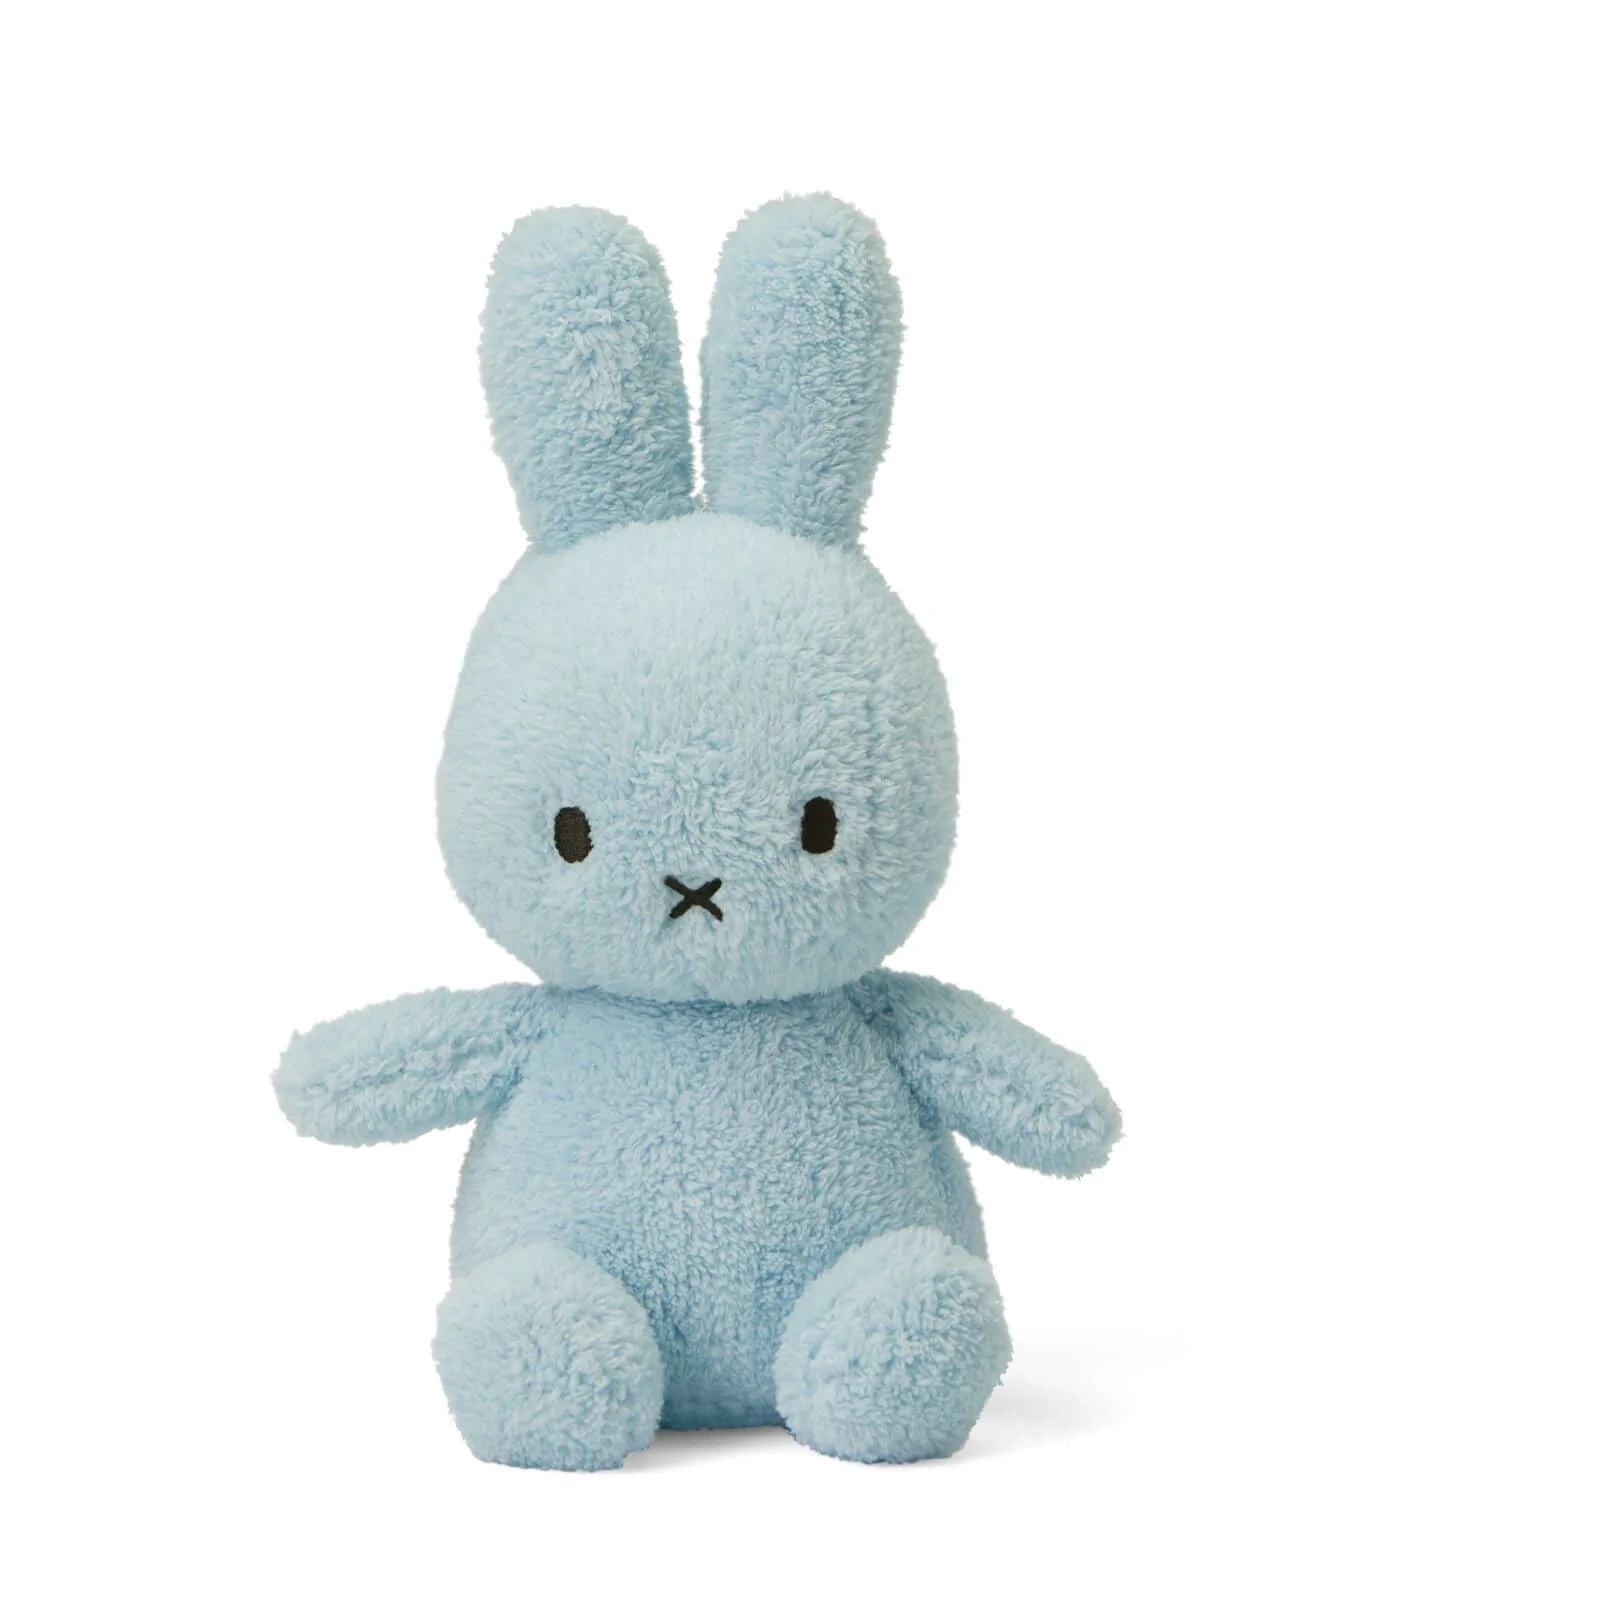 soft terry miffy plush soft toy in blue